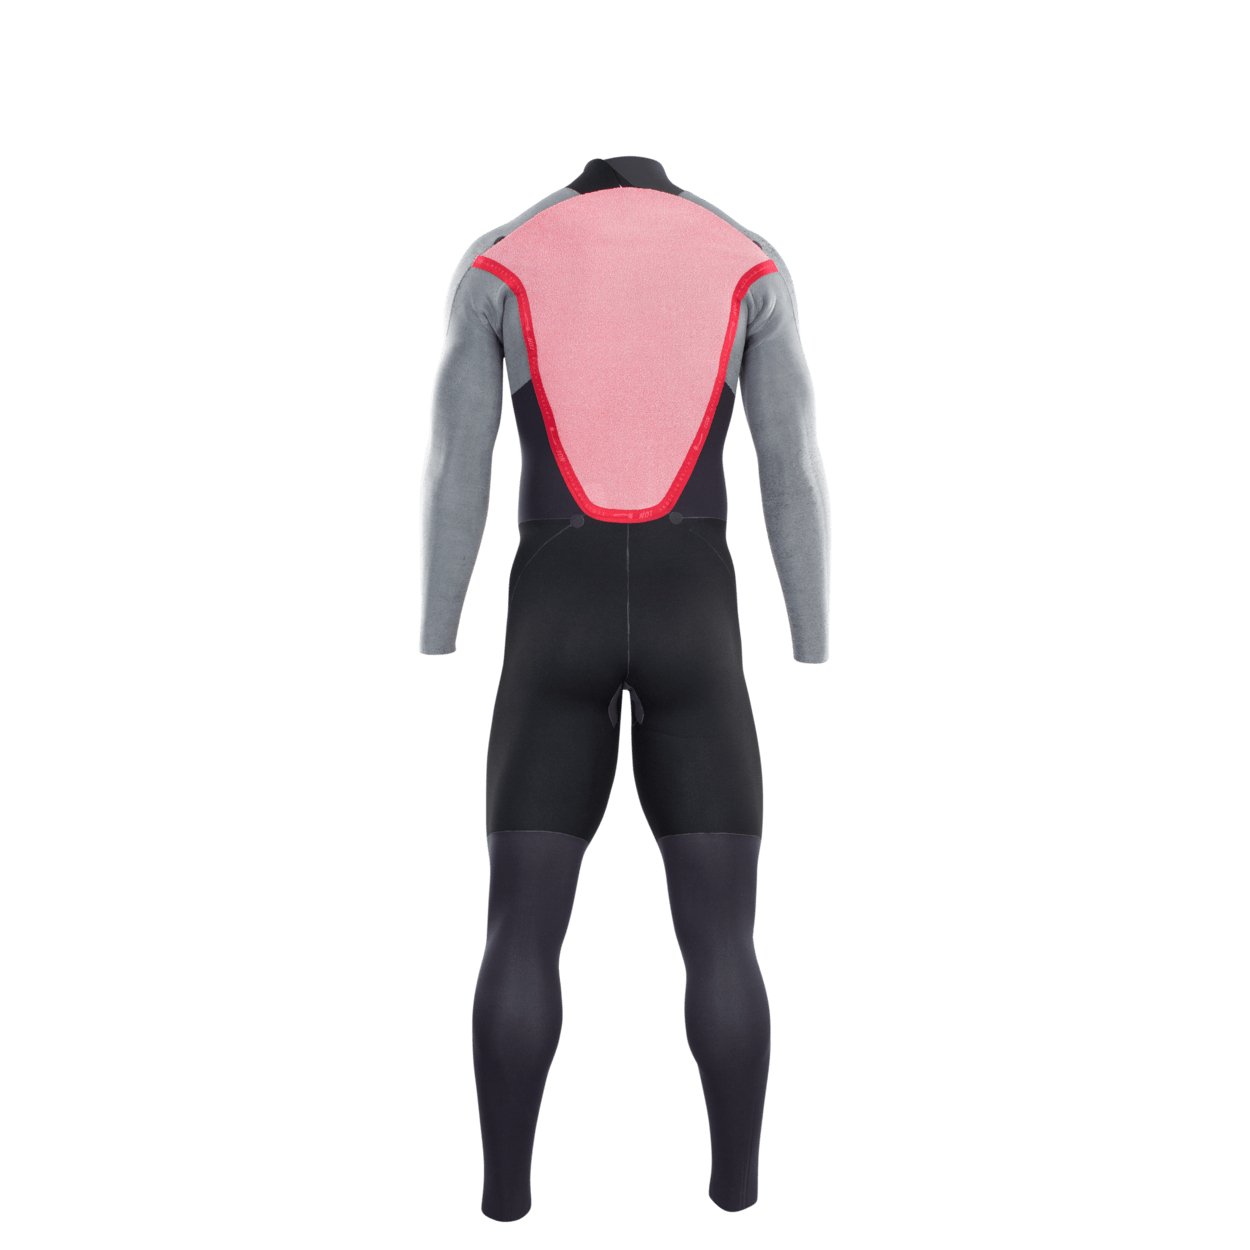 ION Men Wetsuit Element 5/4 Back Zip 2022 - Worthing Watersports - 9008415948819 - Wetsuits - ION Water